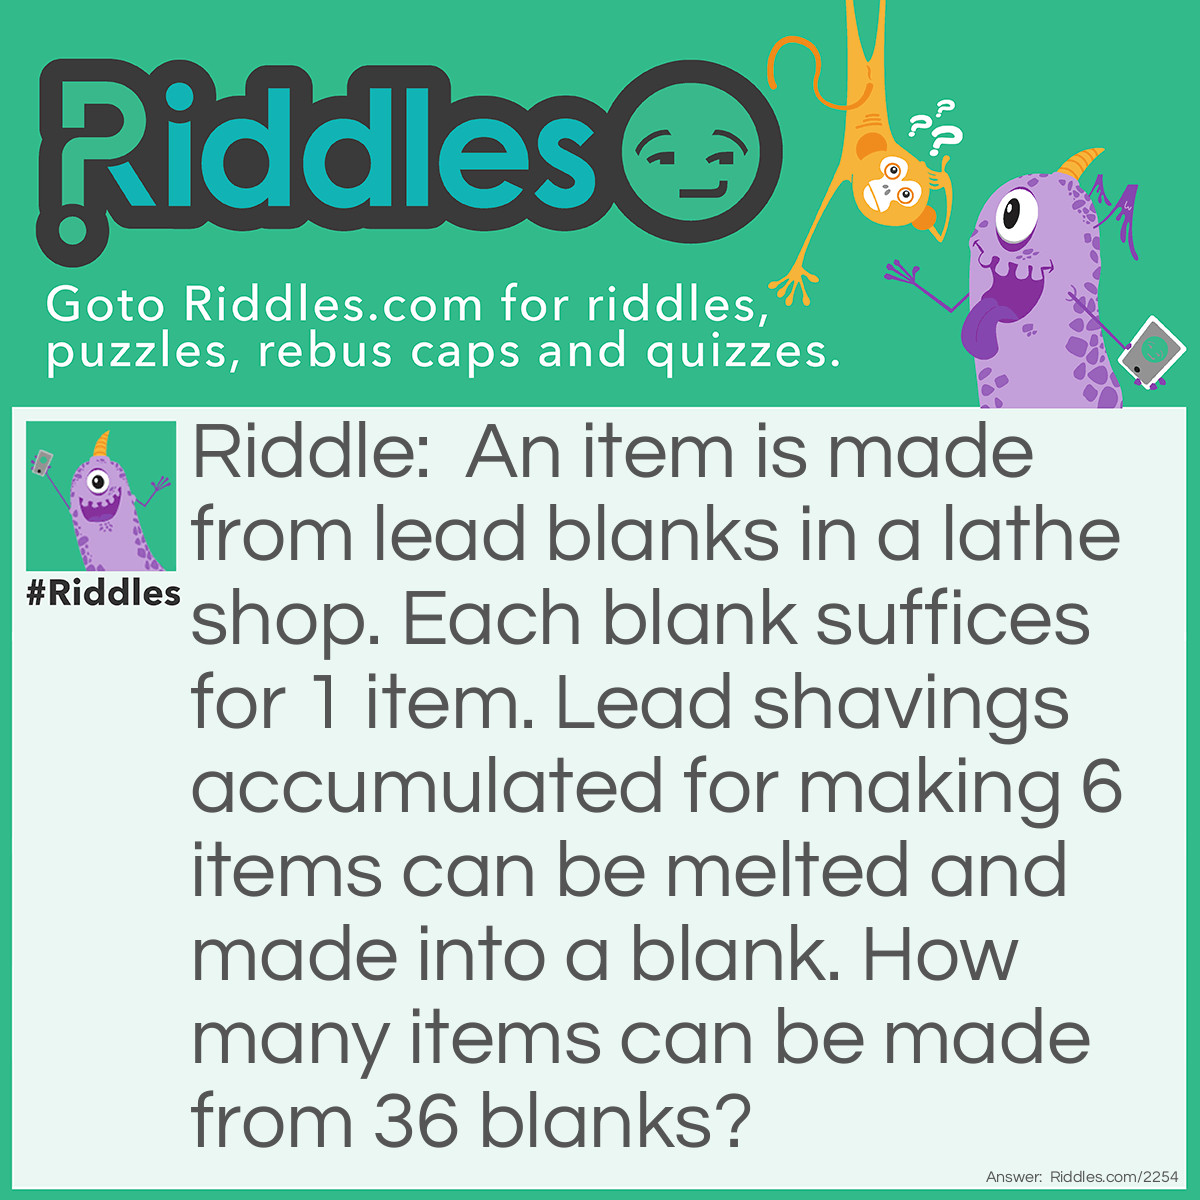 Riddle: An item is made from lead blanks in a lathe shop. Each blank suffices for 1 item. Lead shavings accumulated for making 6 items can be melted and made into a blank. How many items can be made from 36 blanks? Answer: From 36 blanks there are 36 items made. The lead shavings are enough to make 6 blanks. Which make 6 more items. But don't stop here. The new shavings are good for 1 more item. Total: 43.